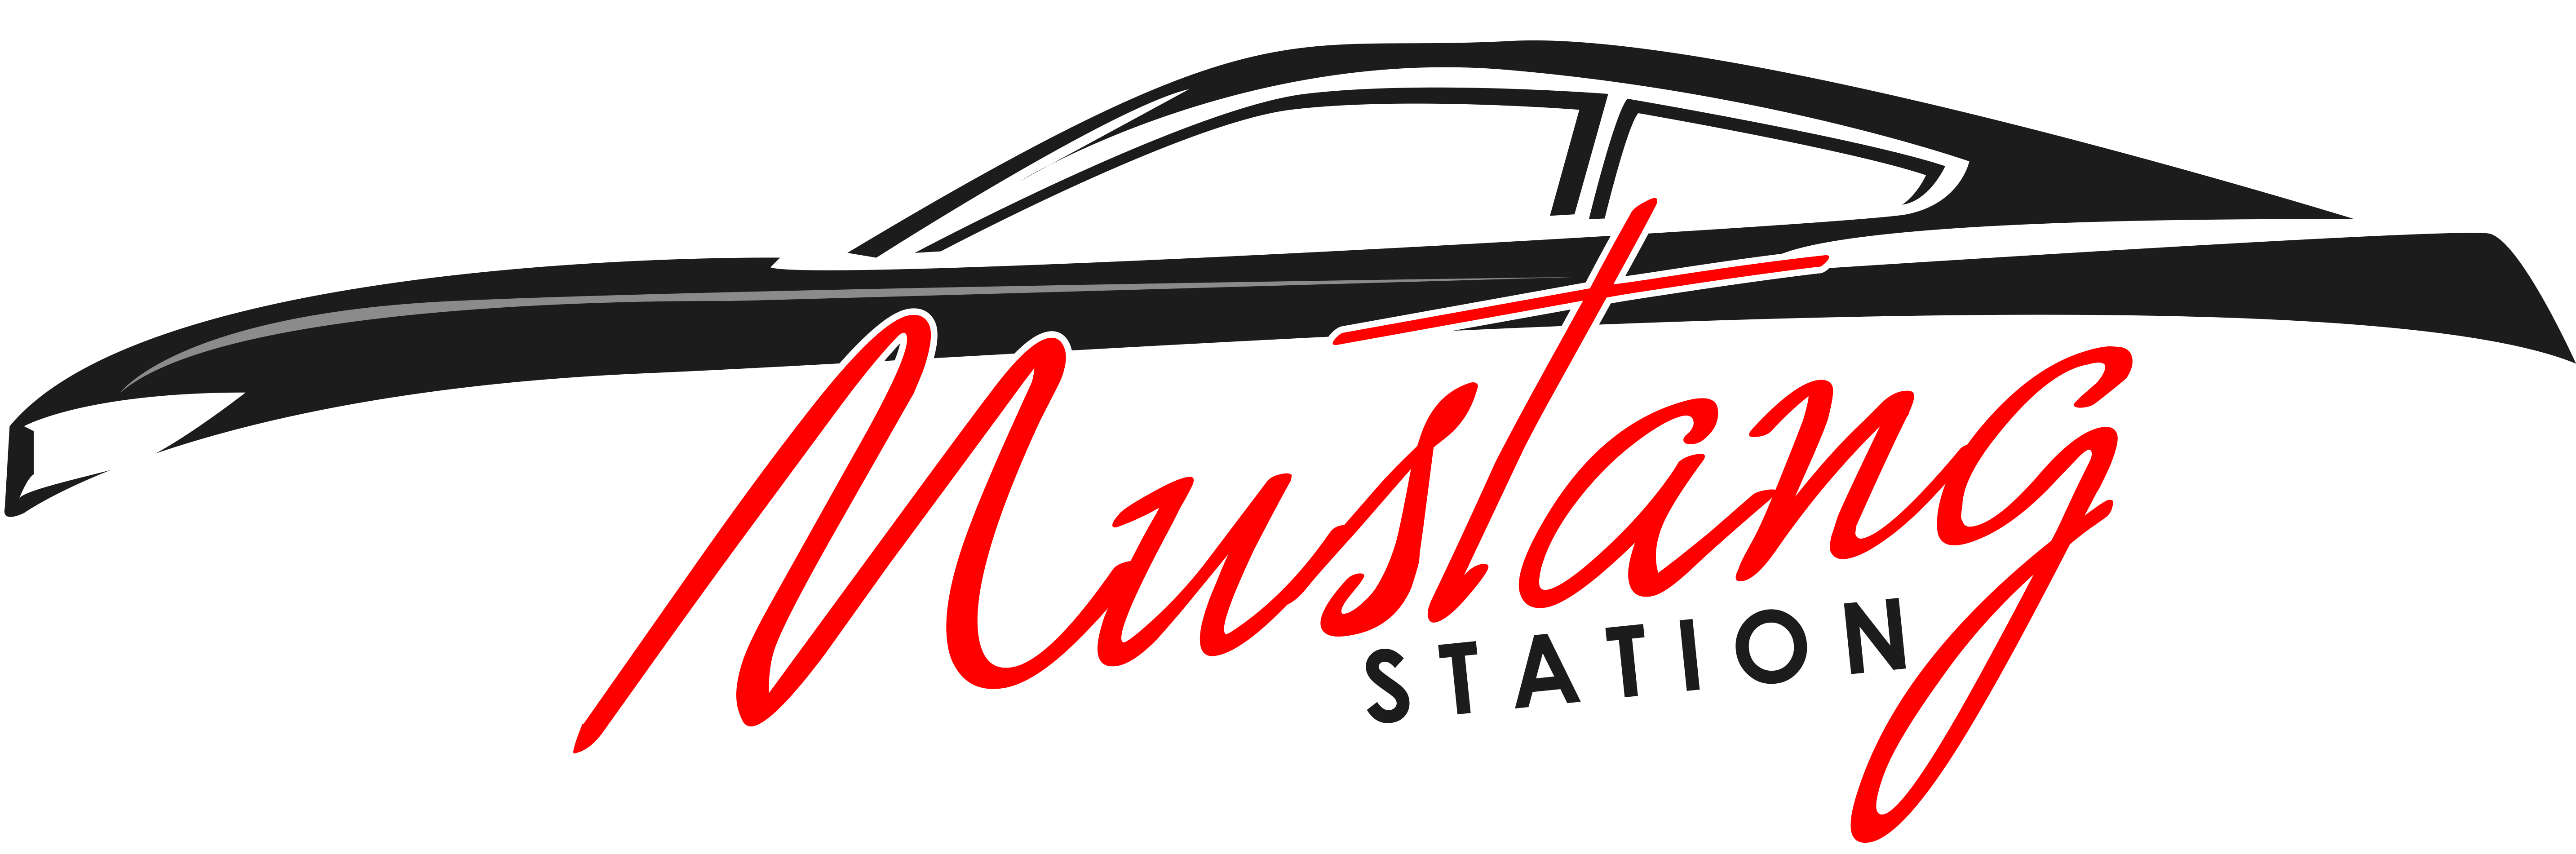 Mustang Station